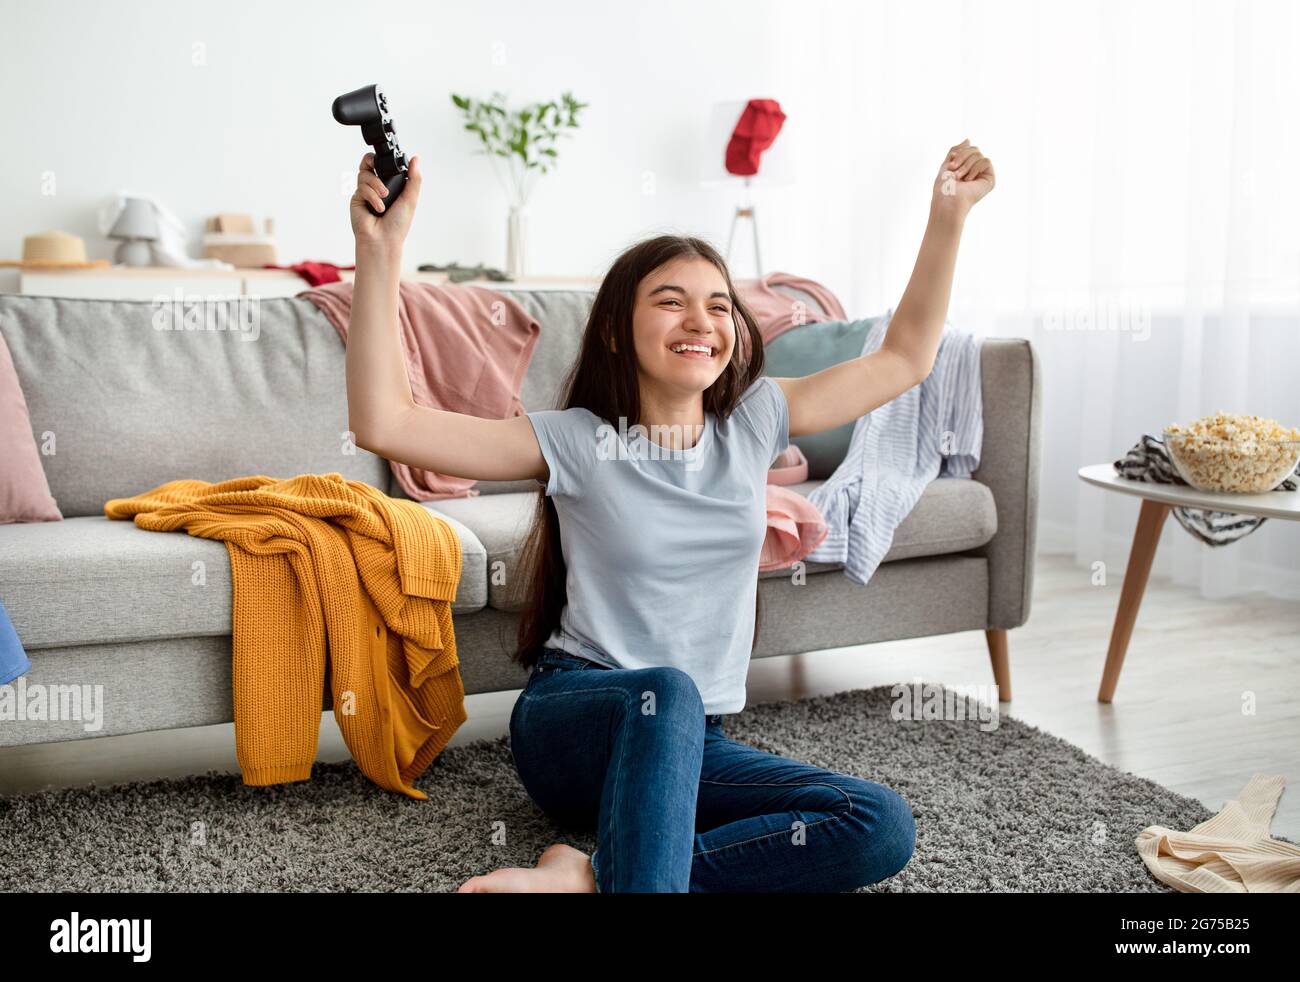 Happy Indian teen girl winning videogame on playstation, having fun, celebrating victory indoors Stock Photo